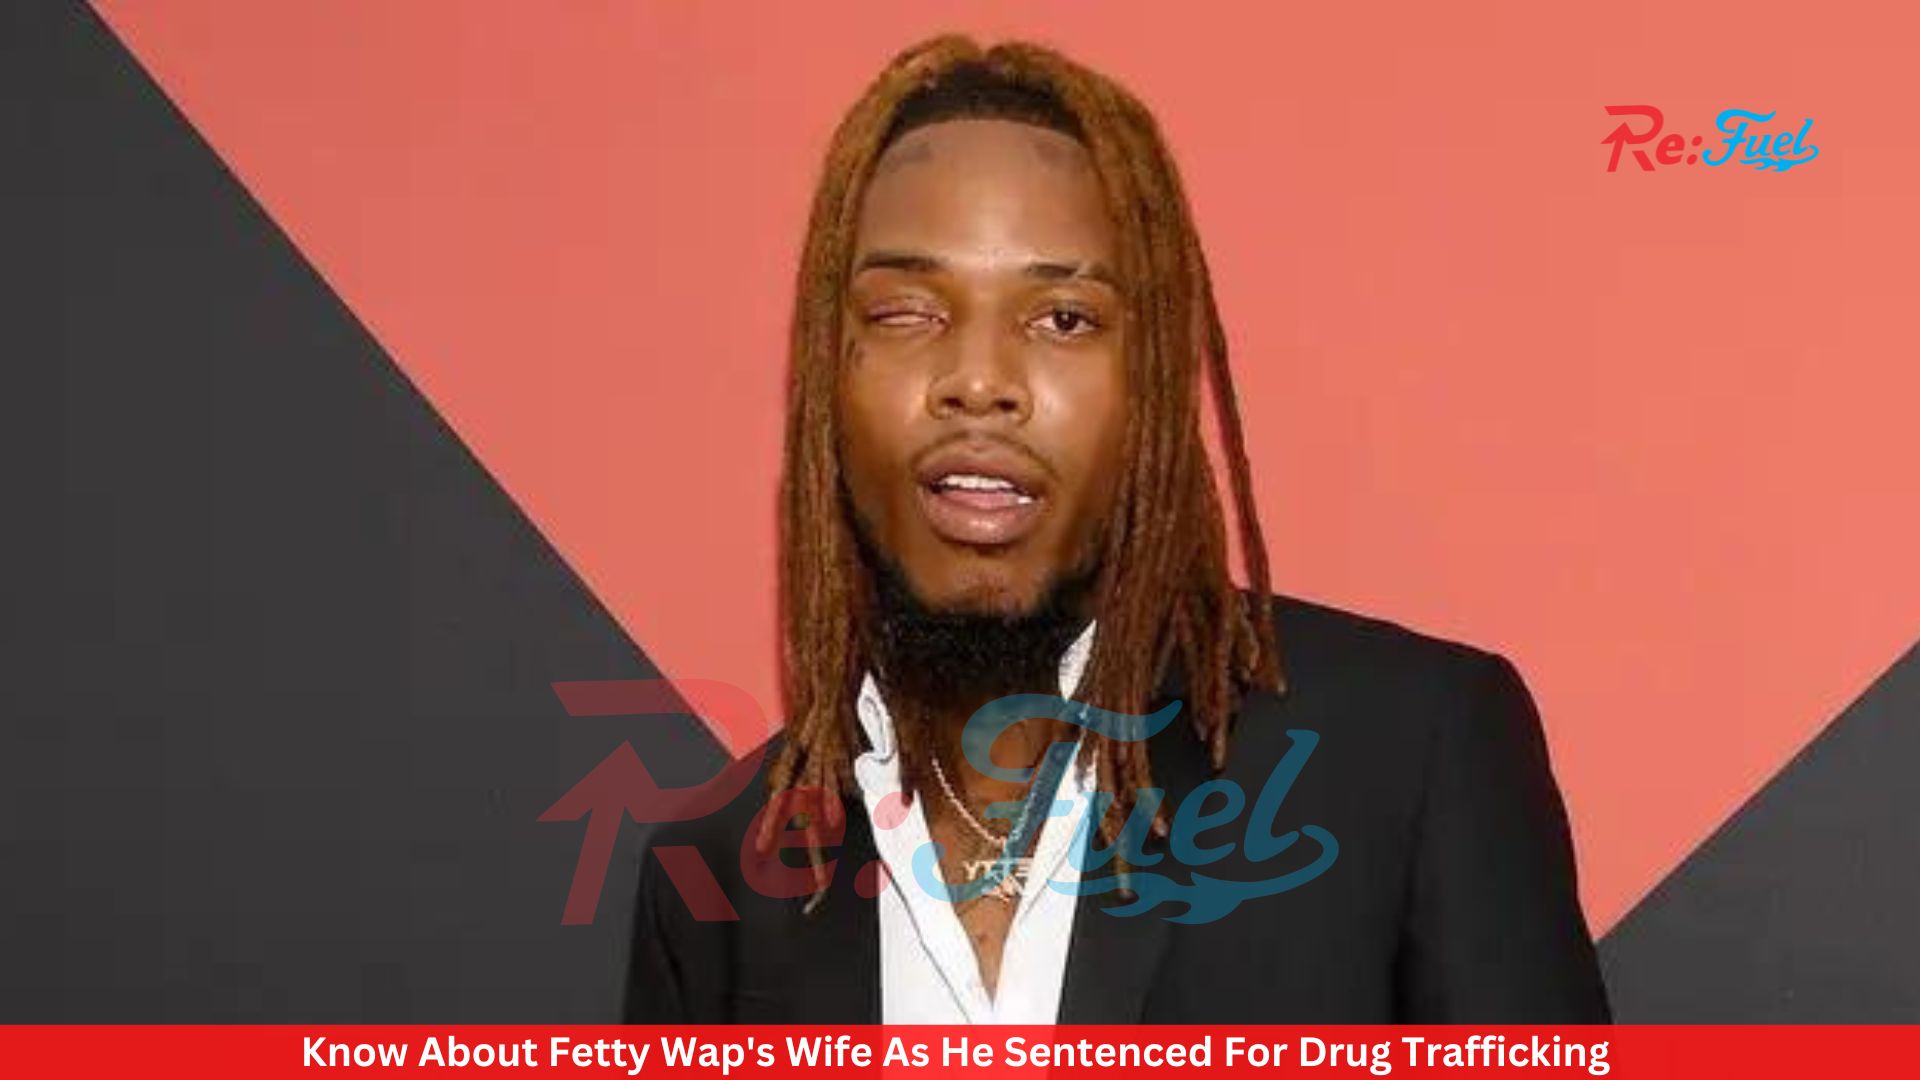 Know About Fetty Wap's Wife As He Sentenced For Drug Trafficking